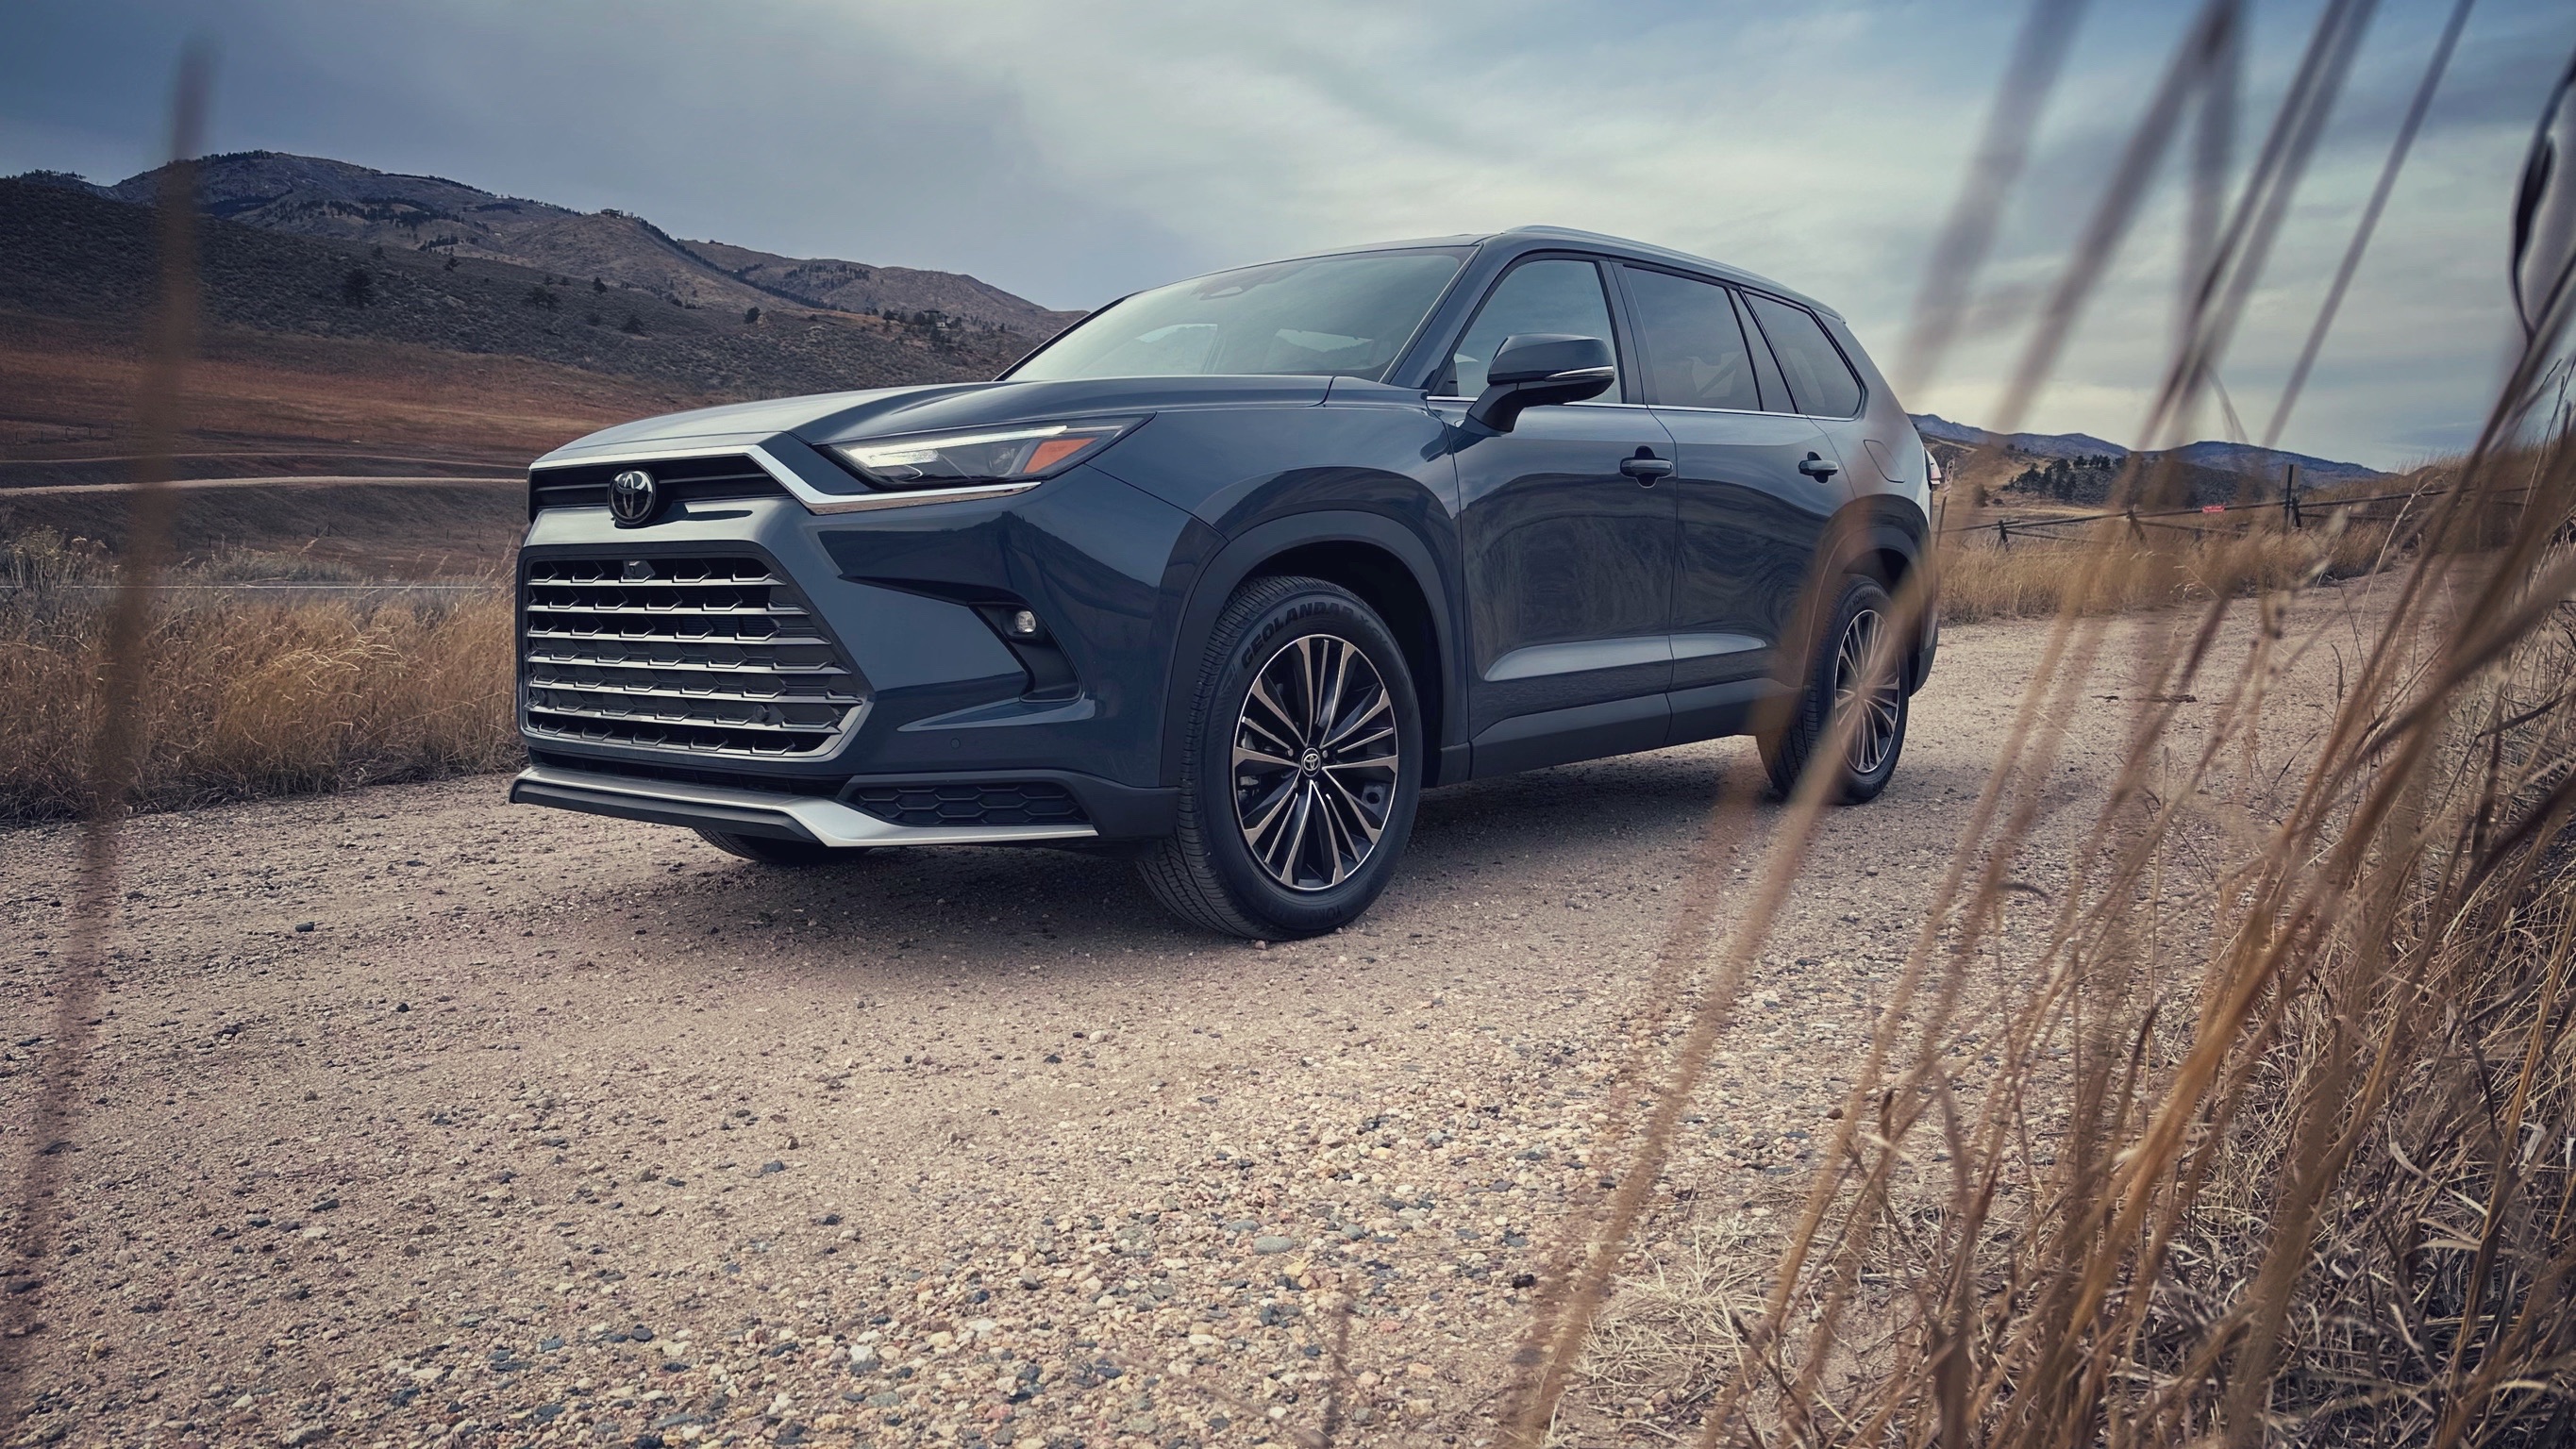 2024 Toyota Grand Highlander is Grander than Anticipated - Features